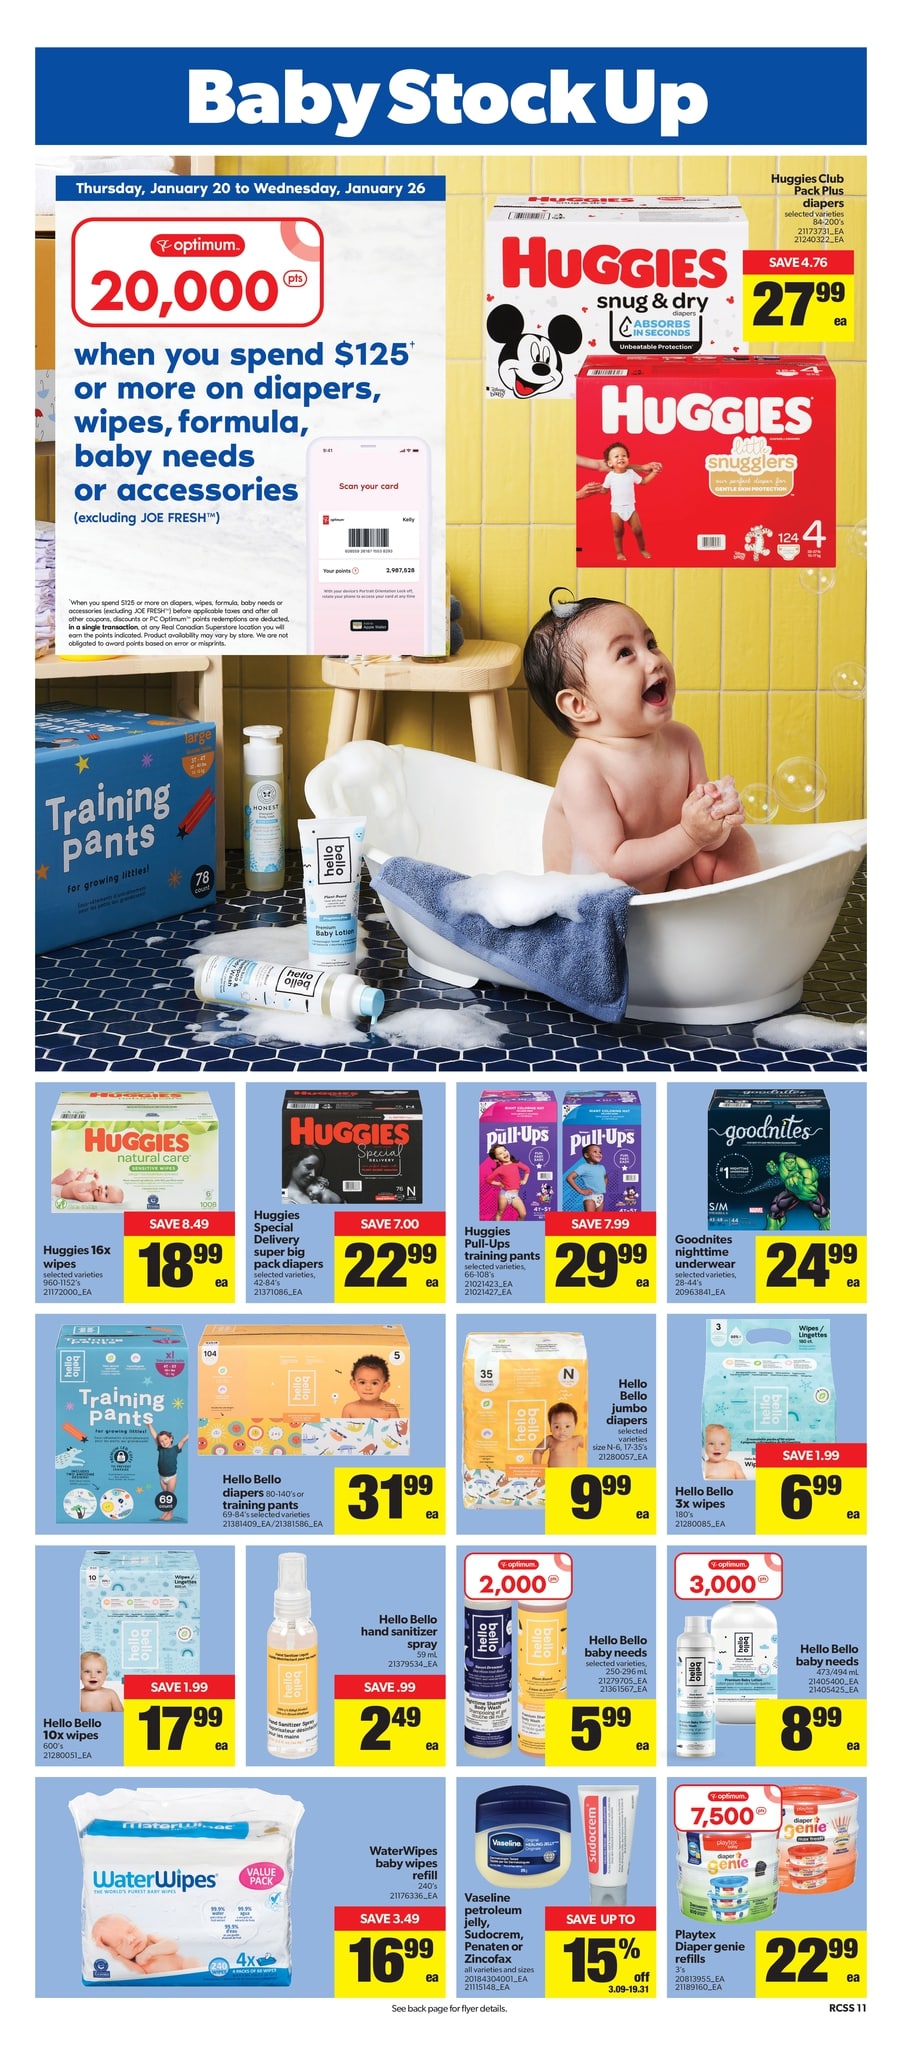 Real Canadian Superstore Ontario - Weekly Flyer Specials - Page 11